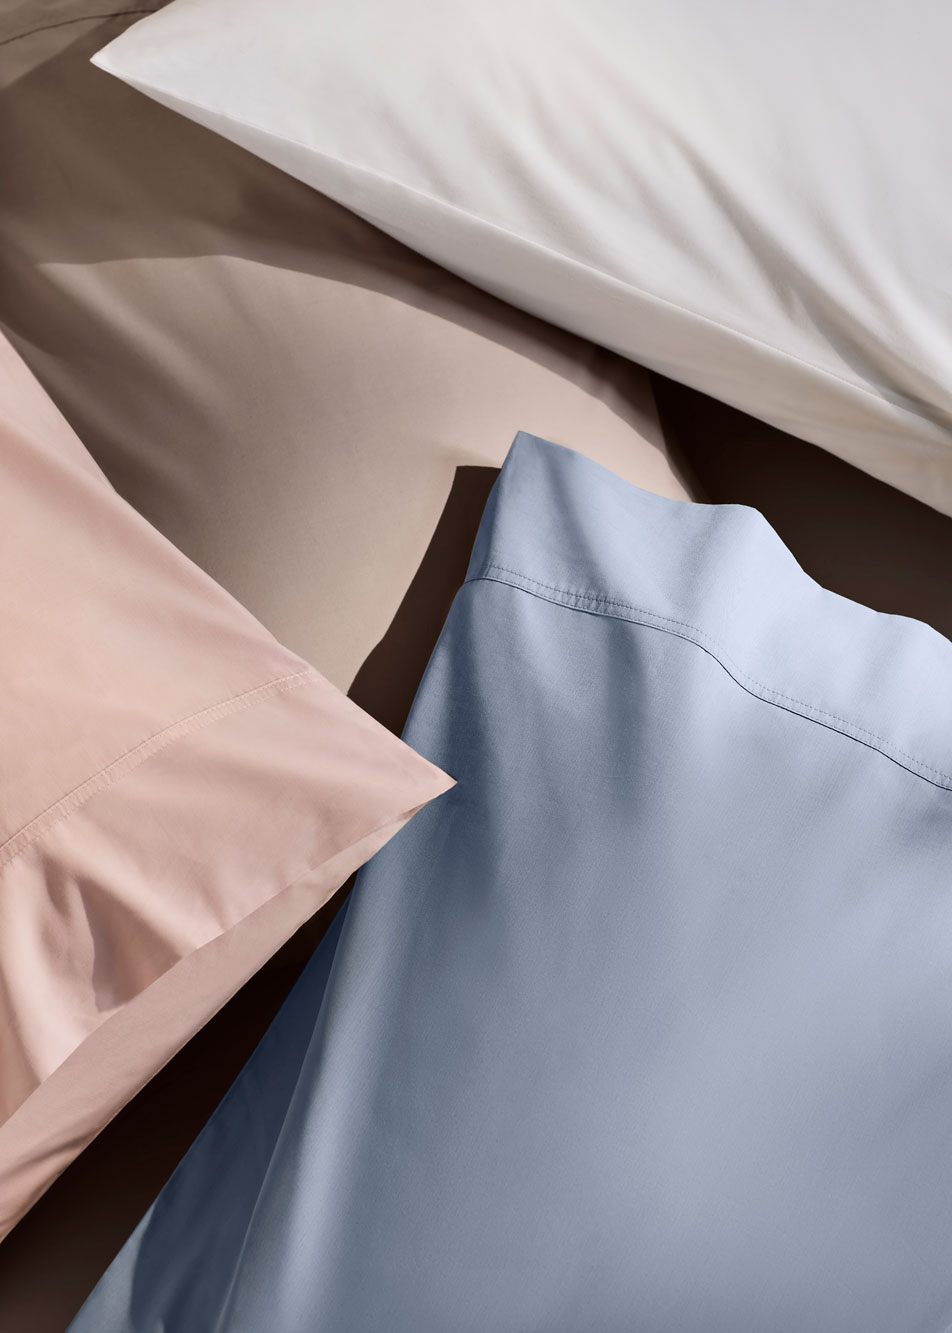 A close-up photo of a stack of pillows. Each pillow has a Byren pillowcase in a different shade: pink, white, blue and grey